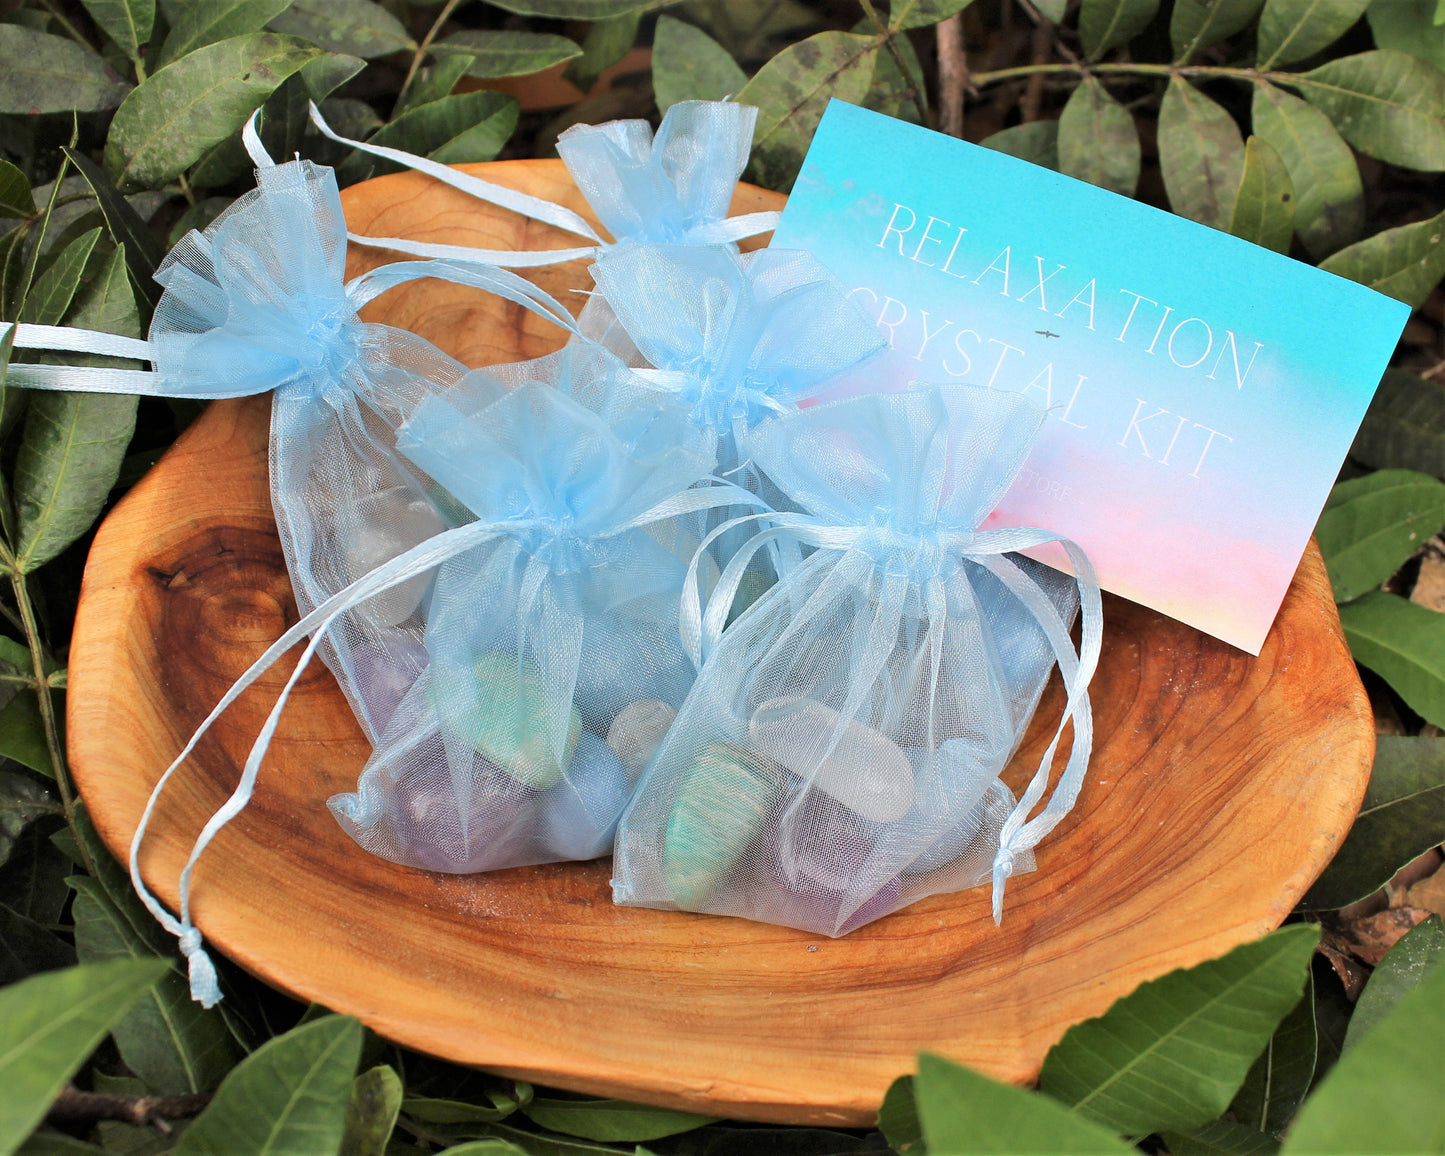 4 Pieces Relaxation Crystal Kit